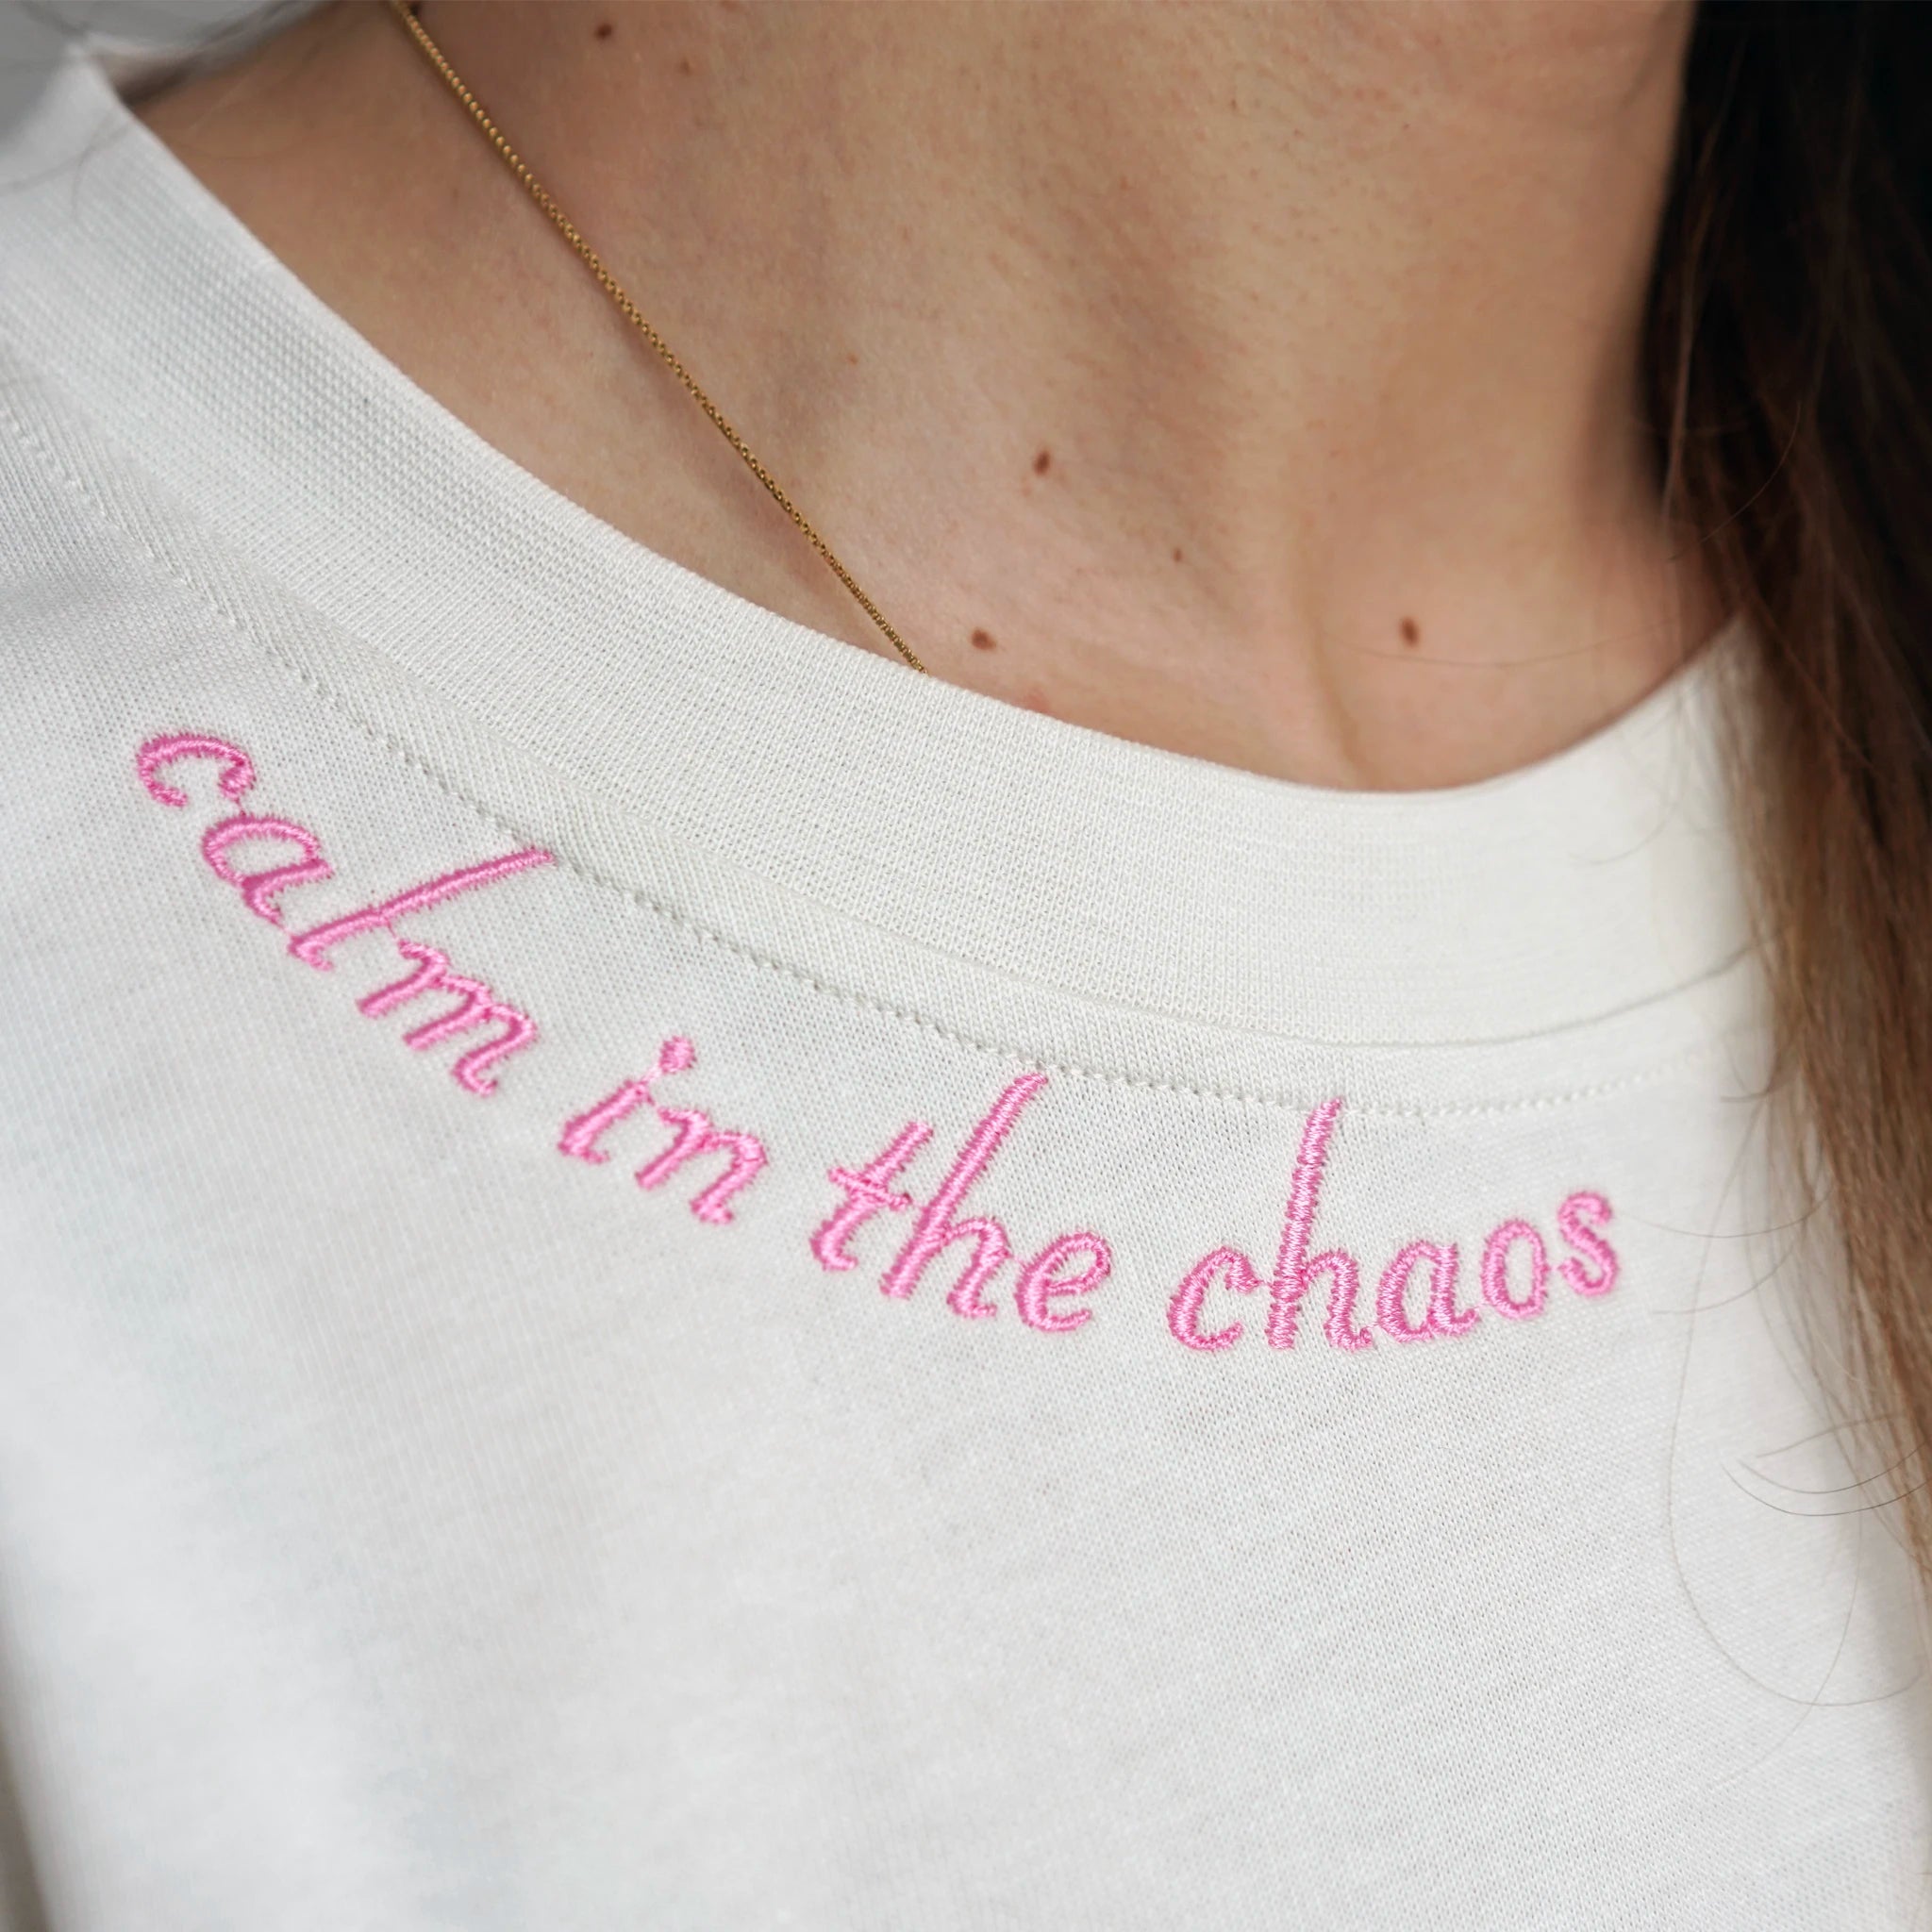 ODAAT Apparel, Calm In The Chaos T-Shirt, Vintage White